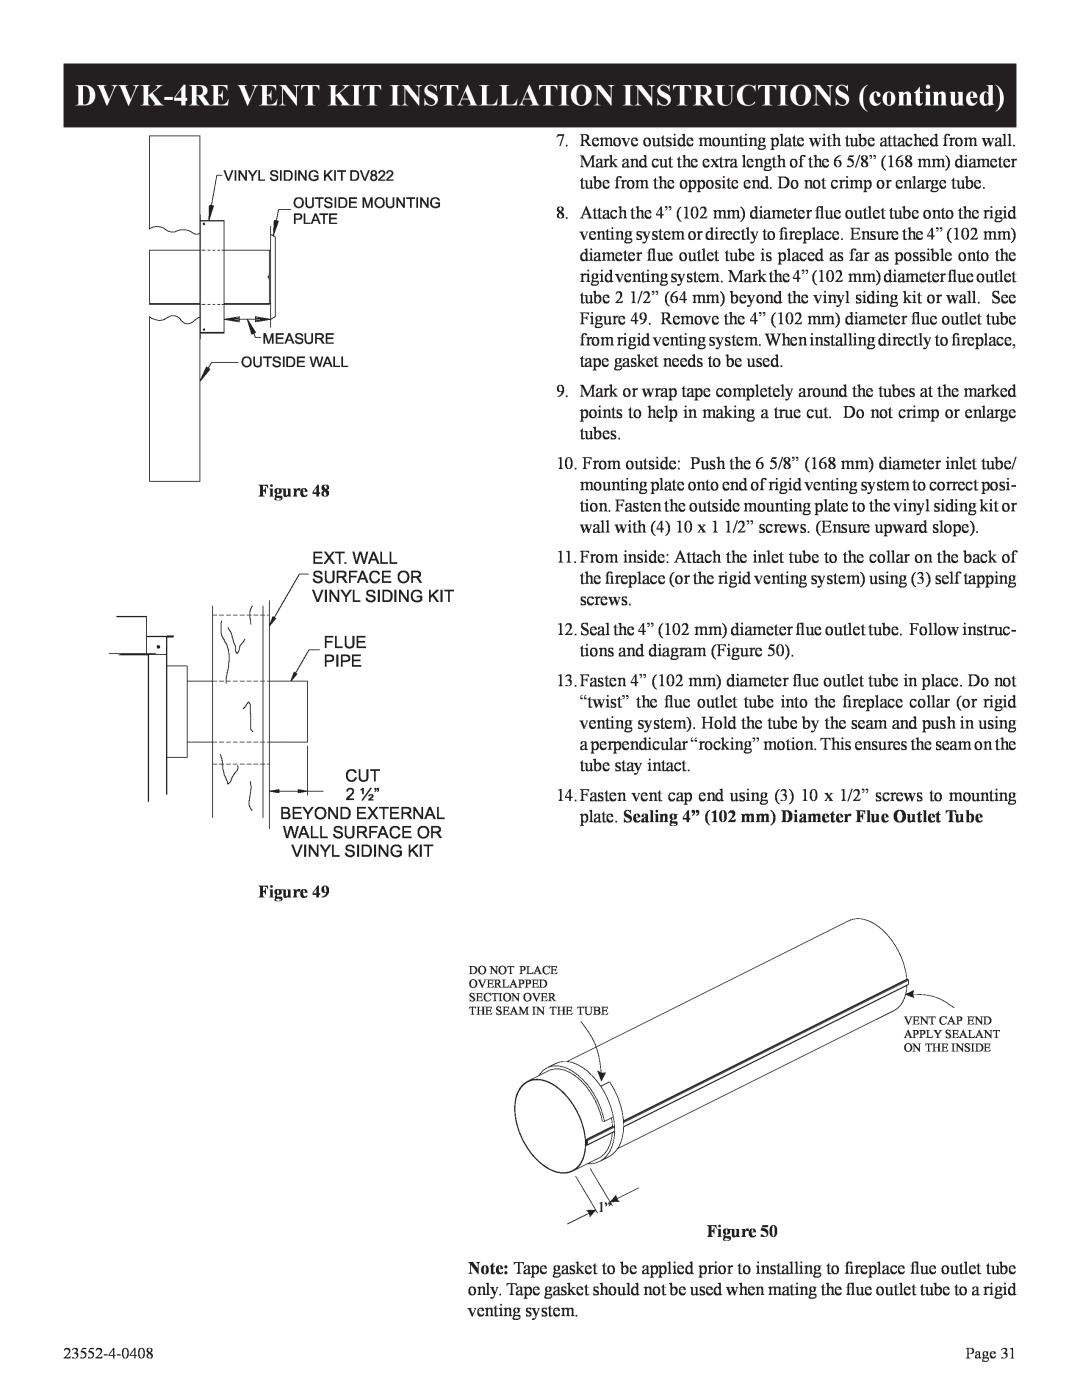 Empire Comfort Systems 3)(N, 1, DVD32FP3 Ext. Wall Surface Or Vinyl Siding Kit Flue Pipe, CUT 2 ½”, 23552-4-0408, Page 